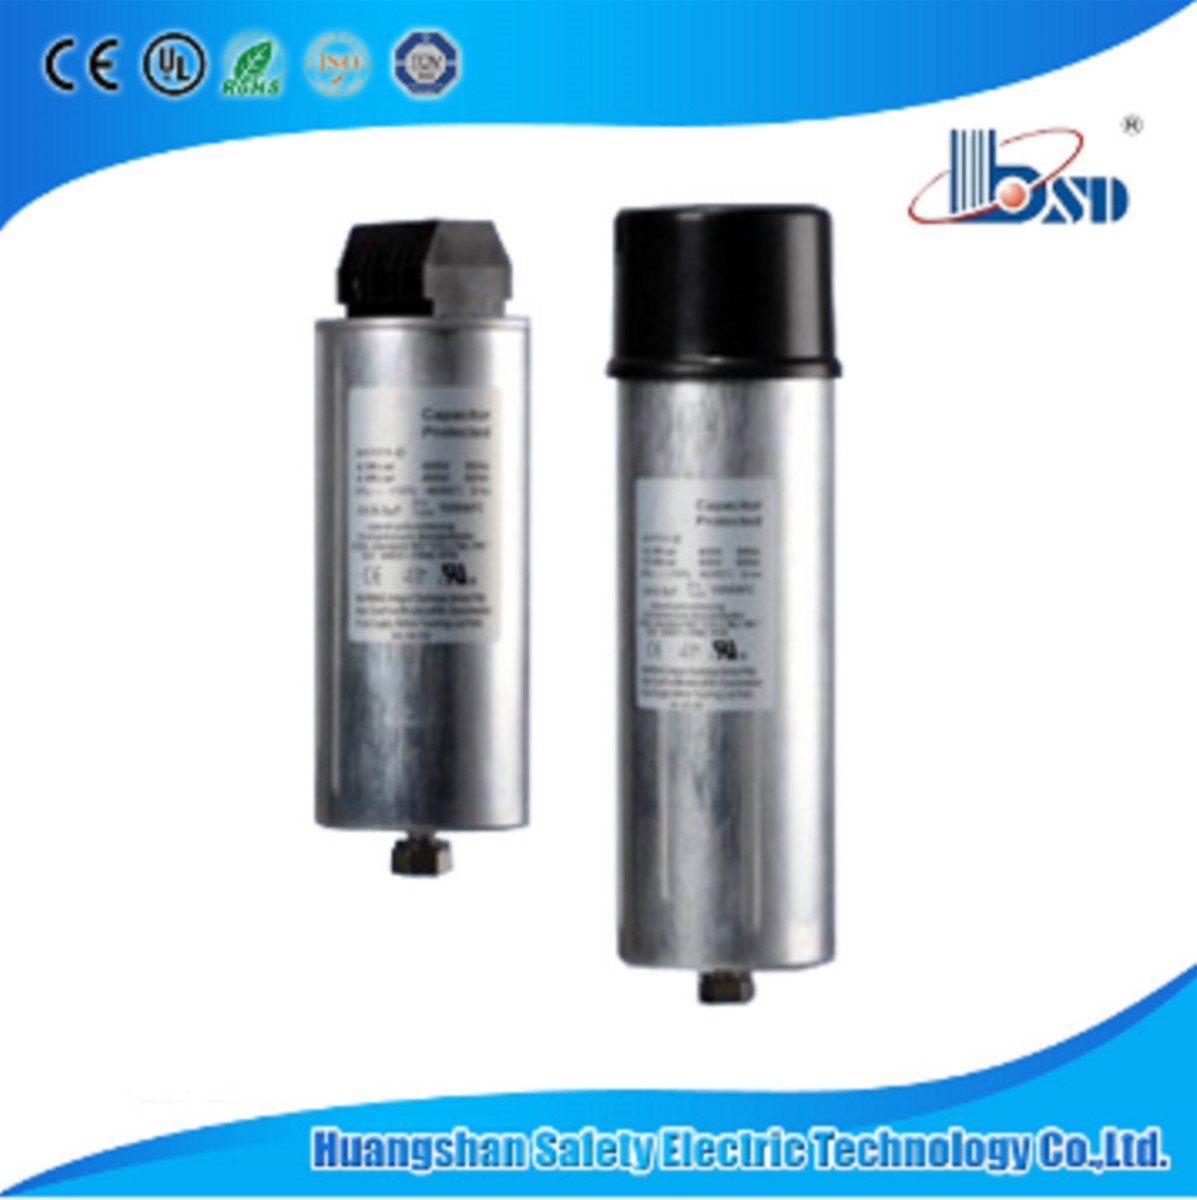 Low Voltage Cylindrical Shunt SelfHealing Power Capacitor